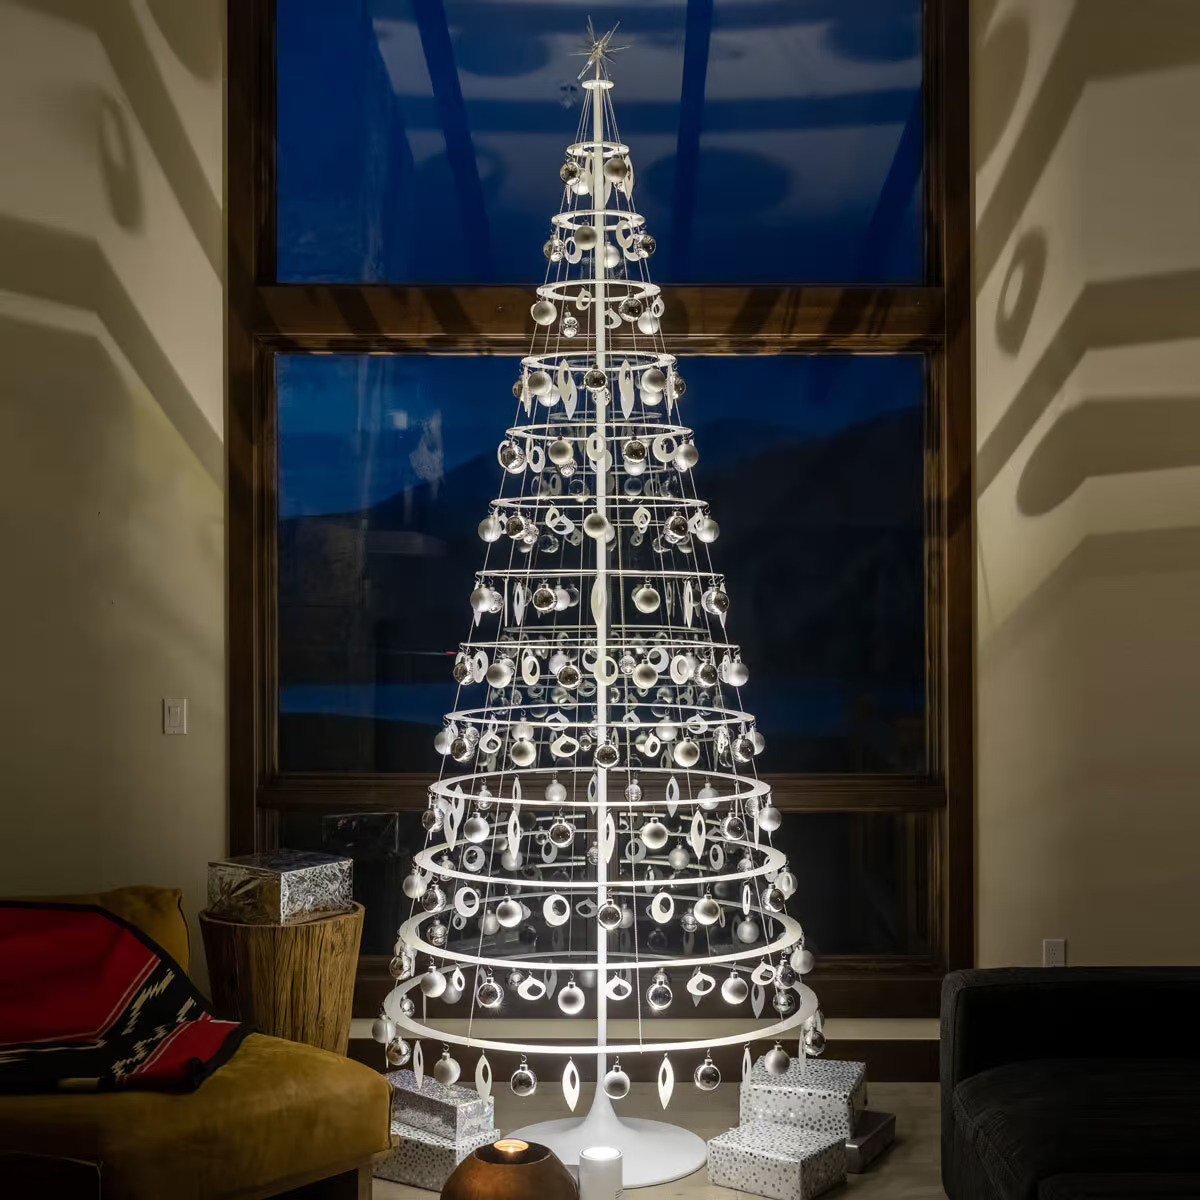 Wireless LED Xmas tree lights for Georg Jensen candle holders